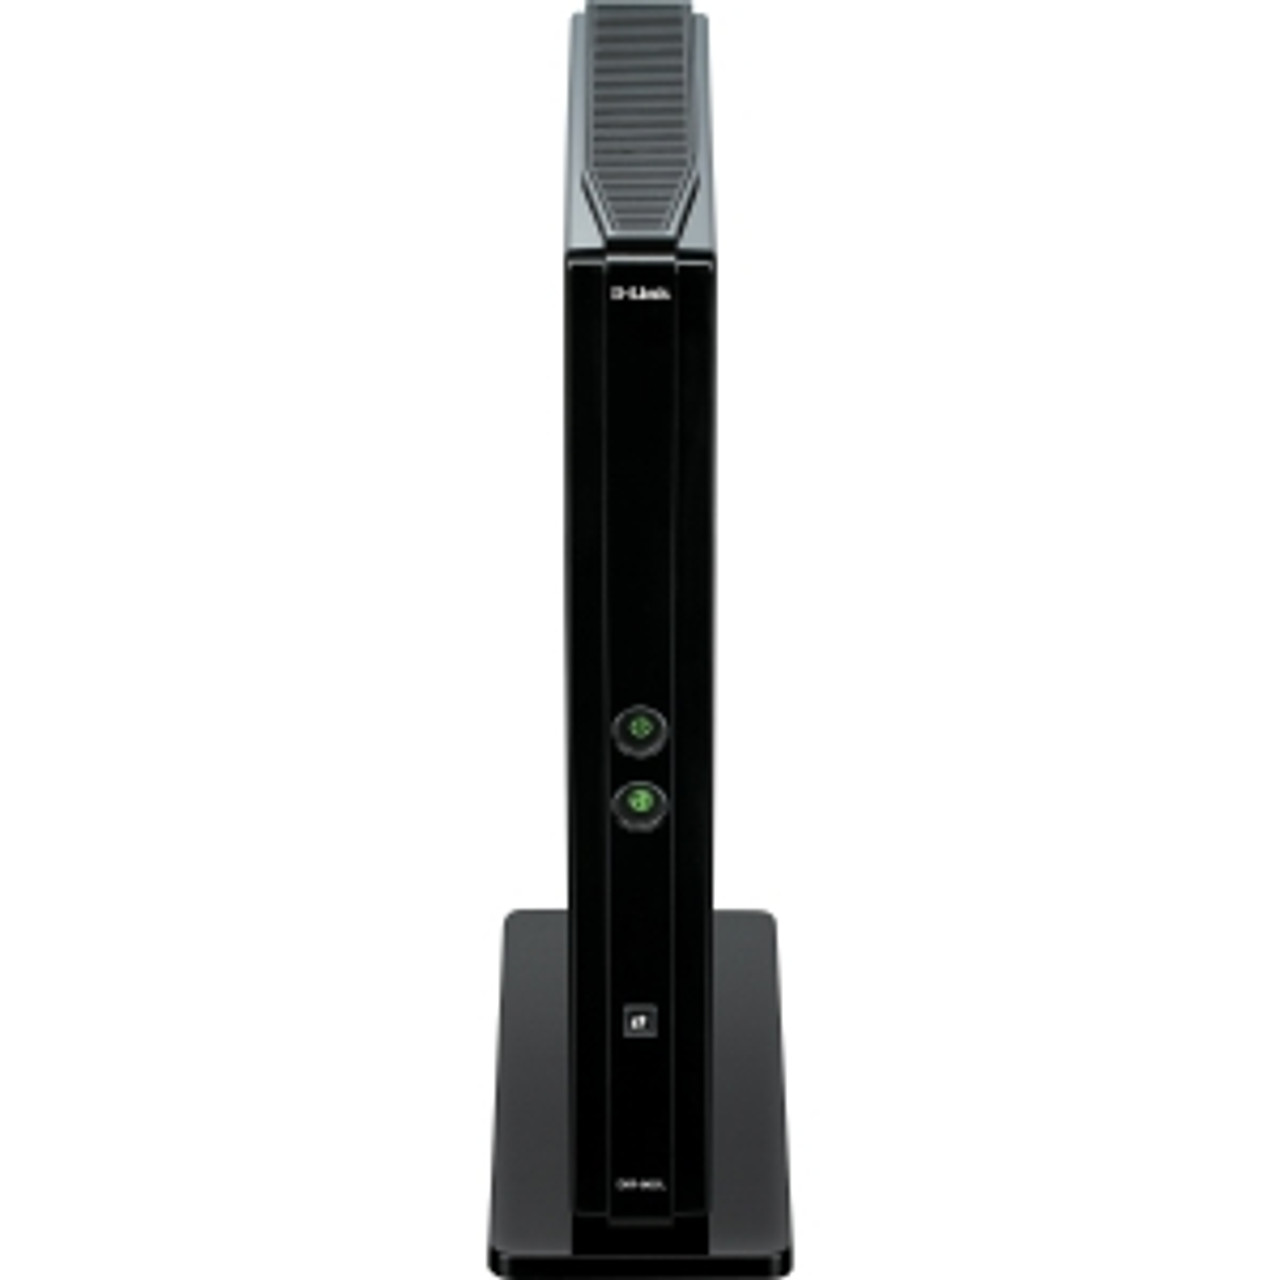 DIR-865L D-Link 5700 Wireless AC 1750 802.11ac Dual-Band 4-Ports Cloud Router (Refurbished)